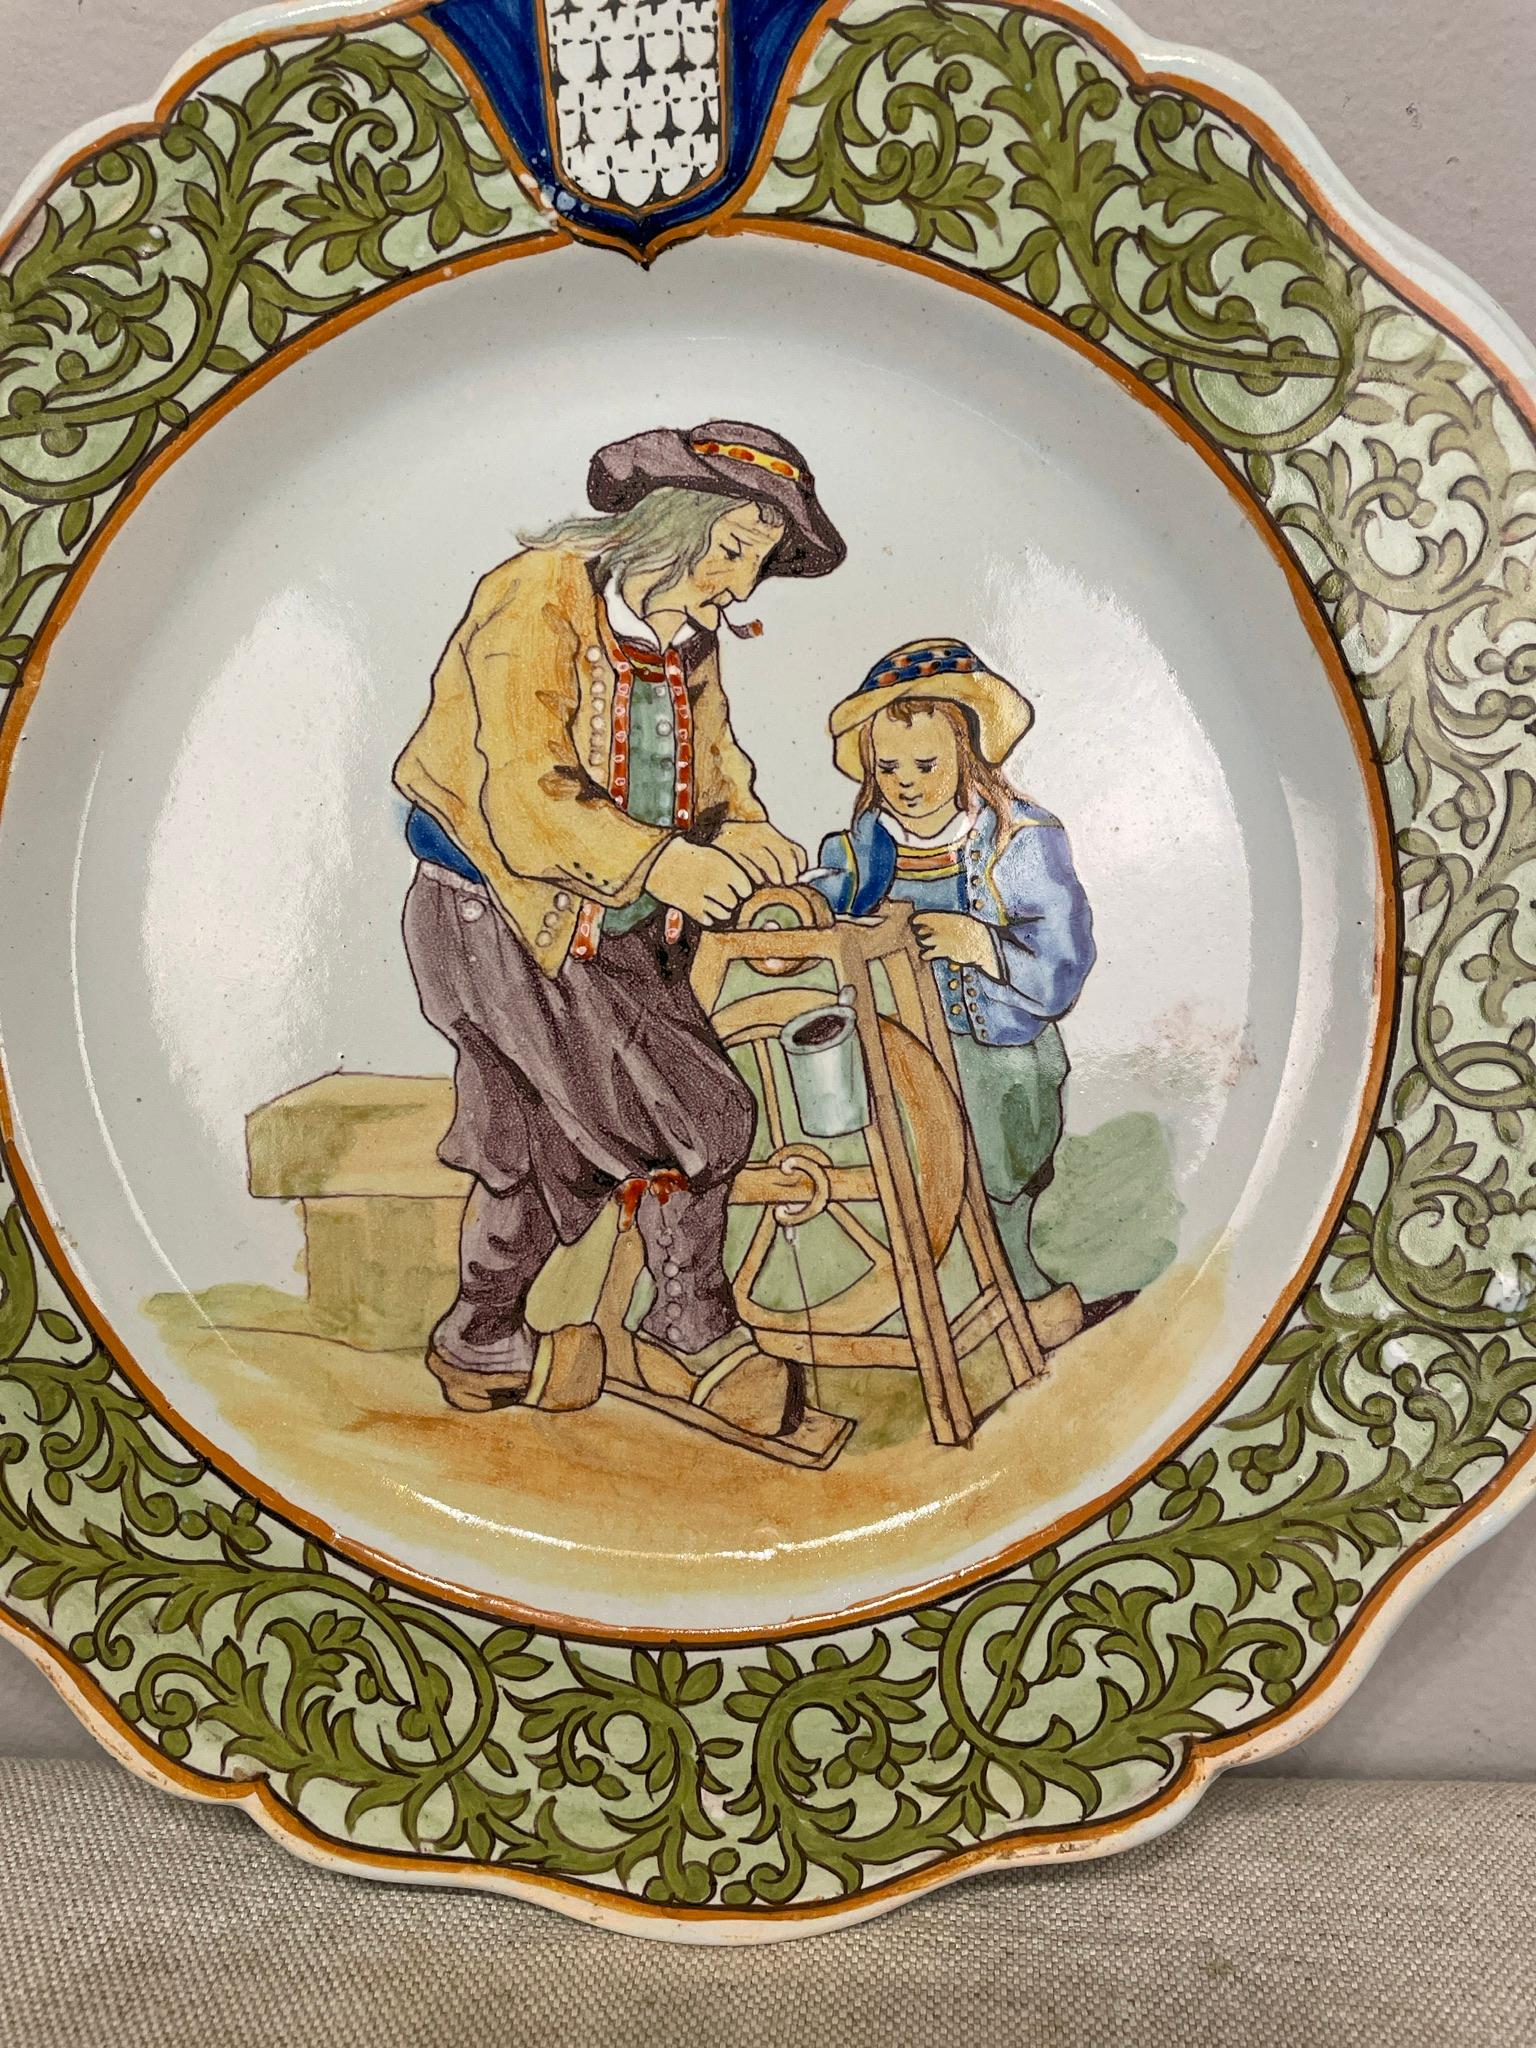 A good 19th century French Porquier Beau Quimper plate with a green border depicting a man with a your child sharpening a knife. good details and in no chips nor hairline.
Signed on the back. Minor wear. 
Dimensions are 9.25